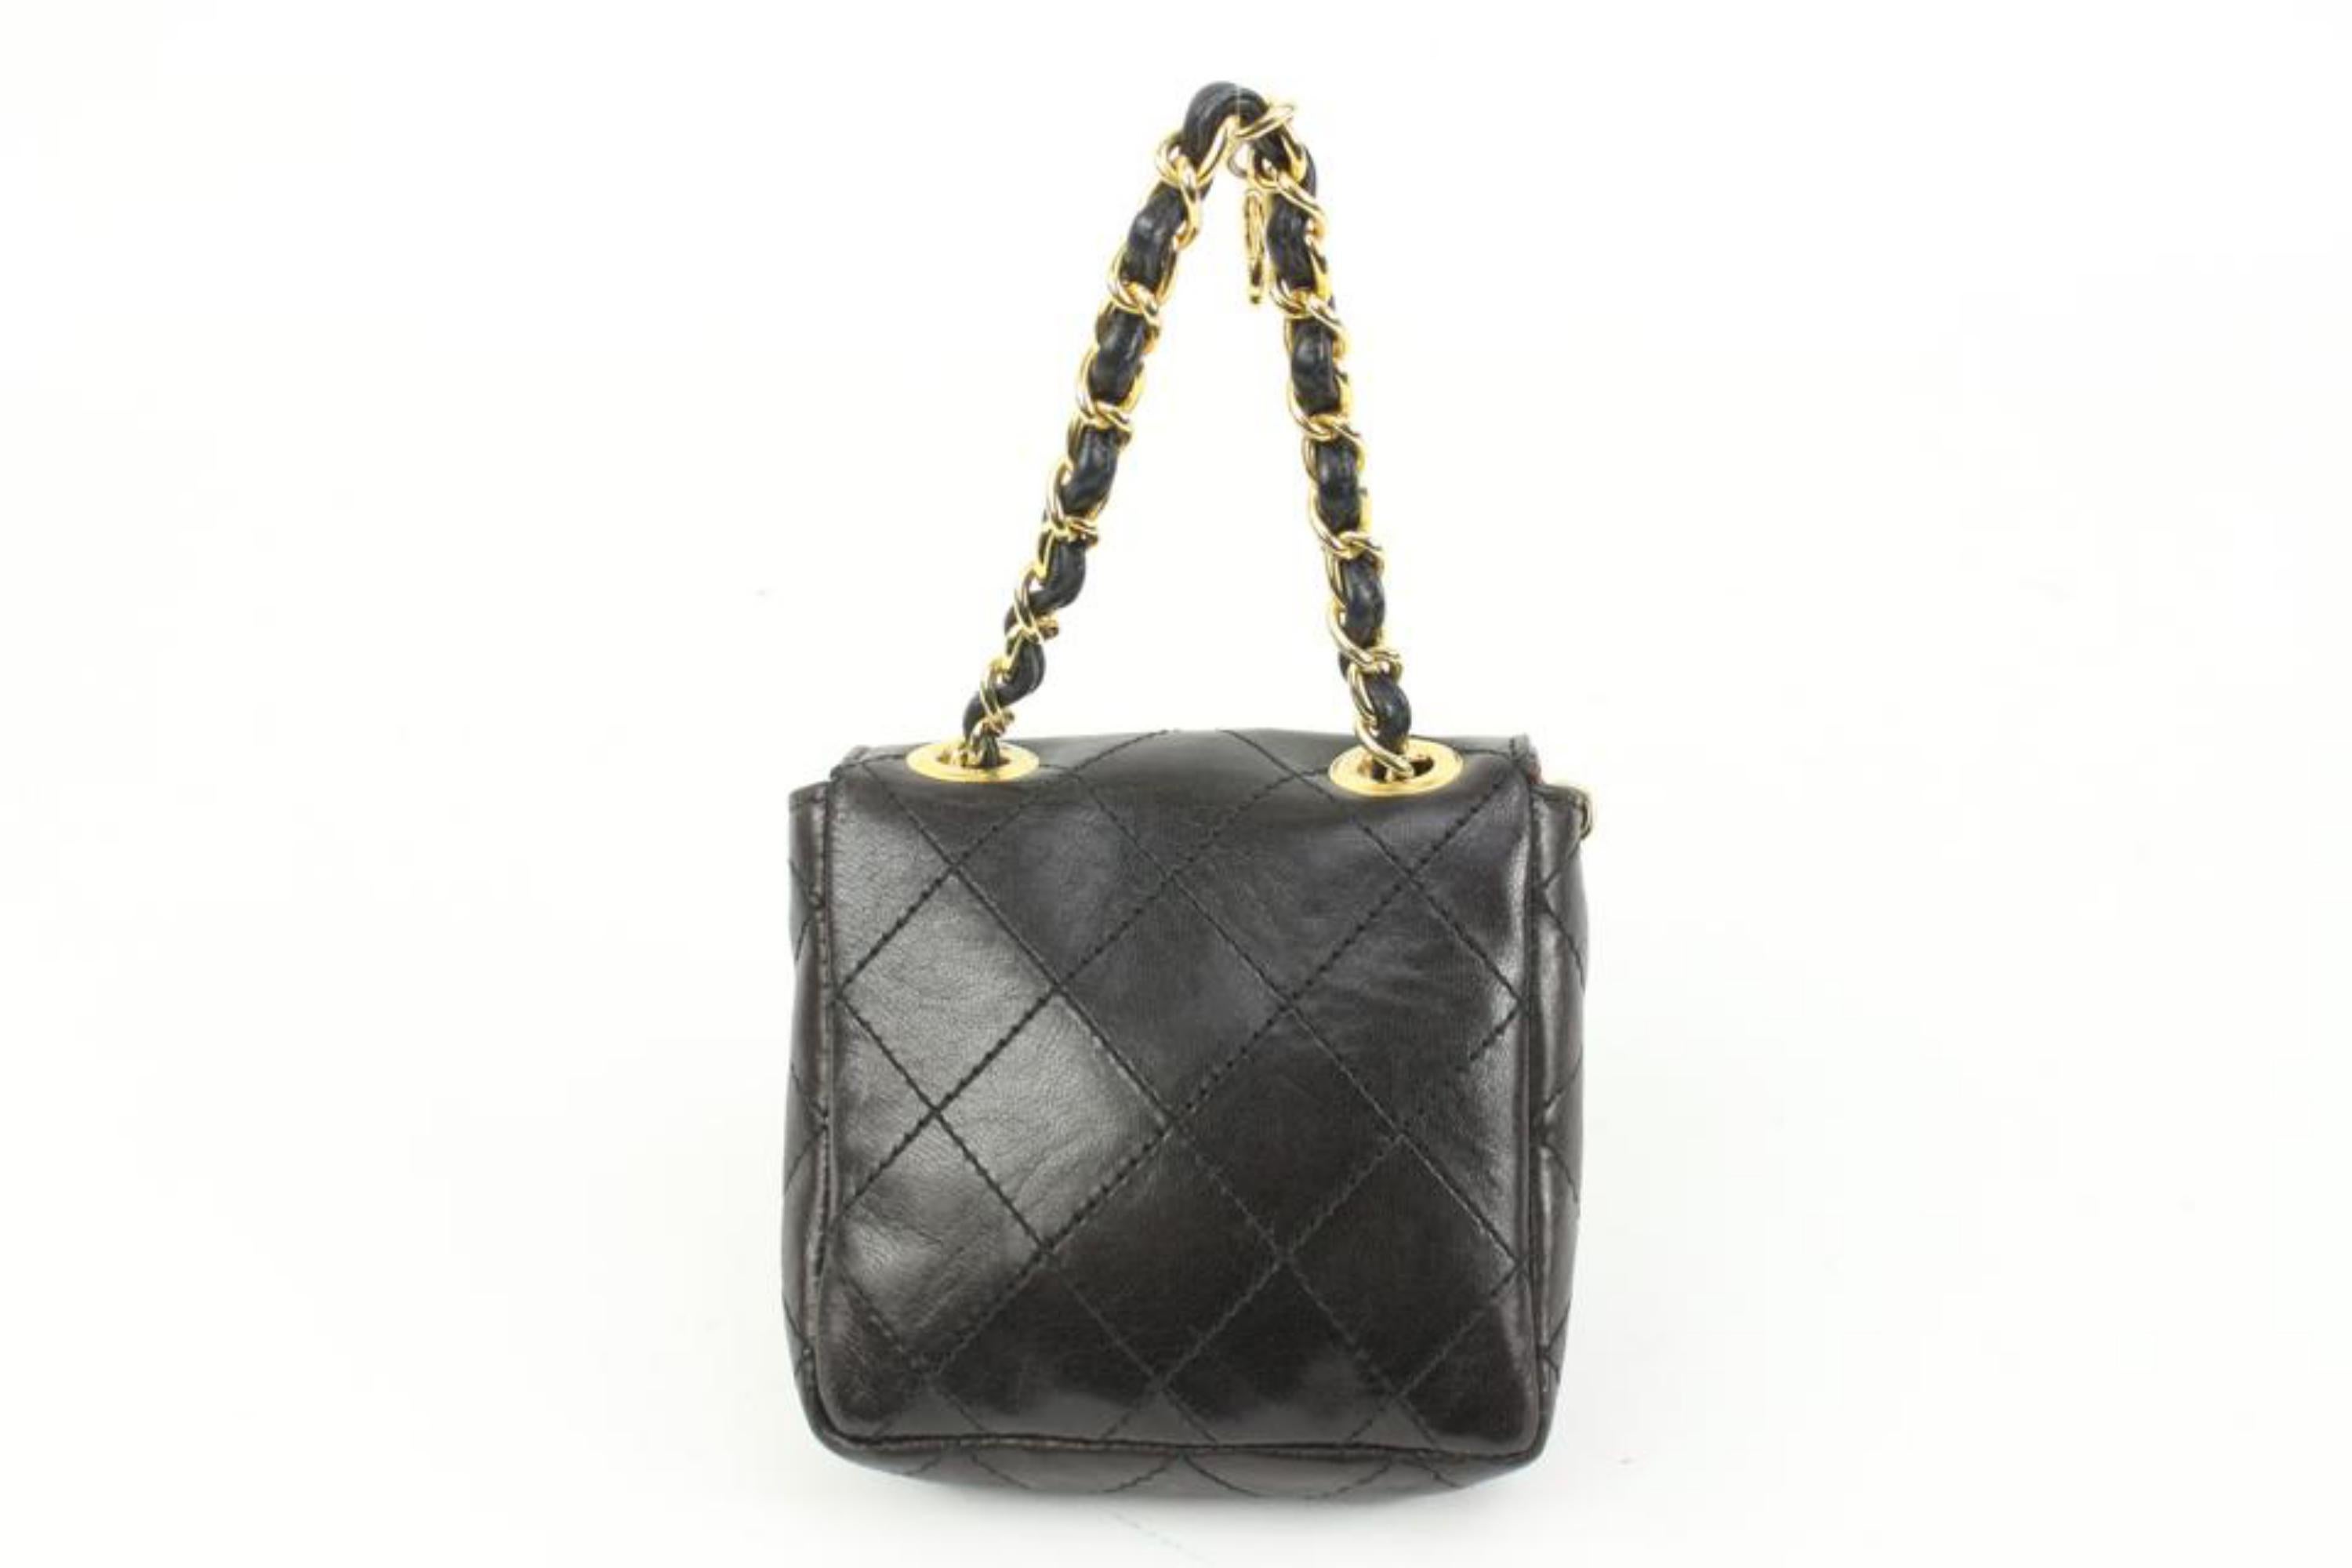 Chanel Black Quilted Lambskin Micro Classic Flap Mini Bag 50ck325s 2